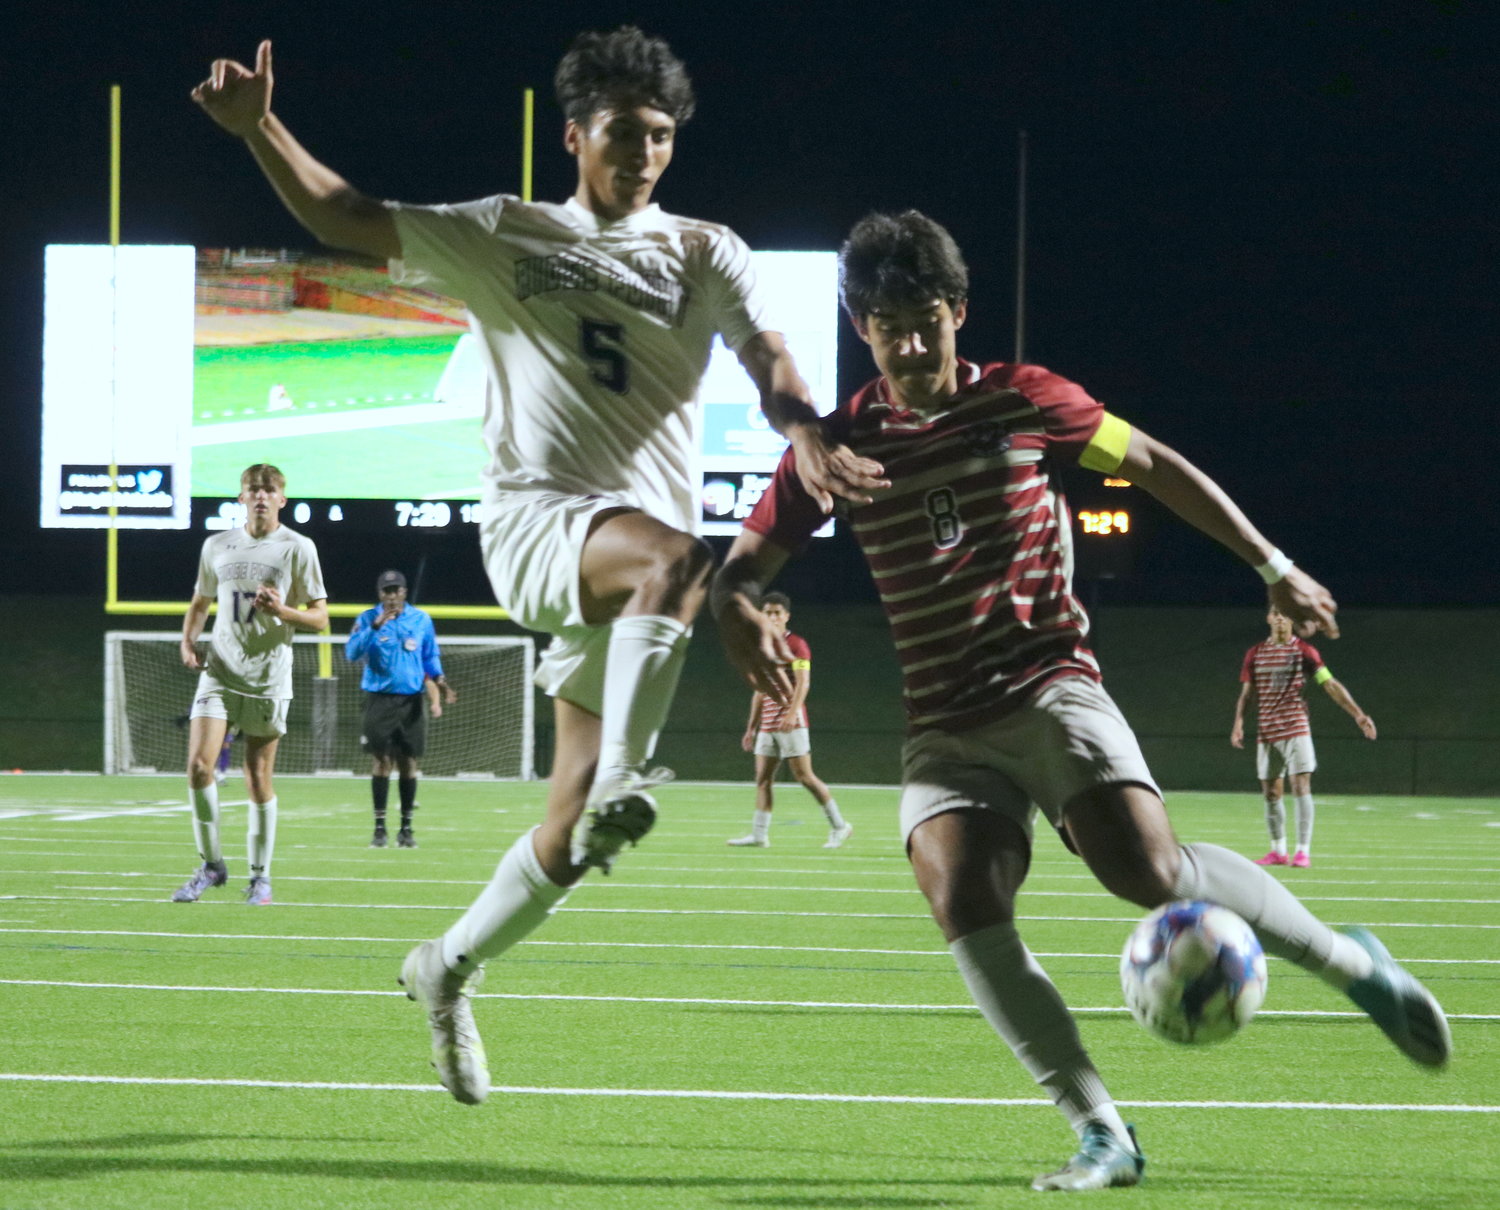 Rafa Gonzales tries to shoot a ball as a defender challenges during Friday’s Class 6A bi-district round game between Tompkins and Ridge Point at Rhodes Stadium.